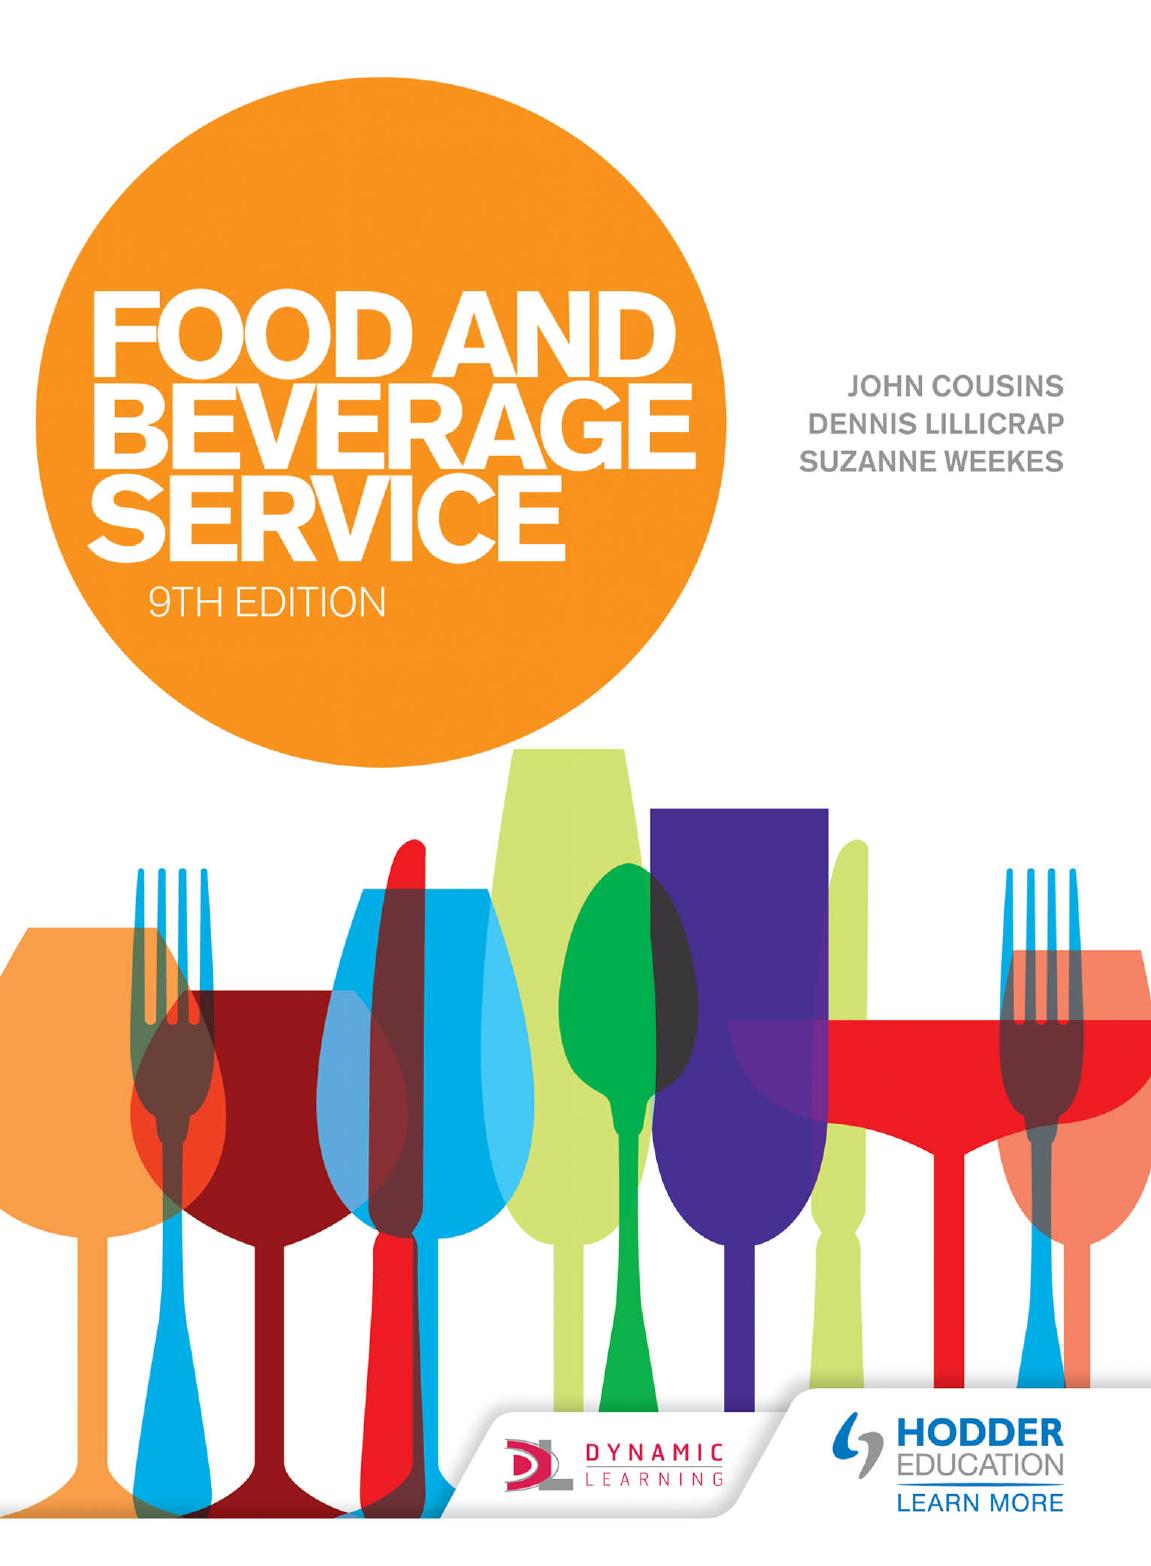 Food and Beverage Service 9th Edition - John Cousins.jpg